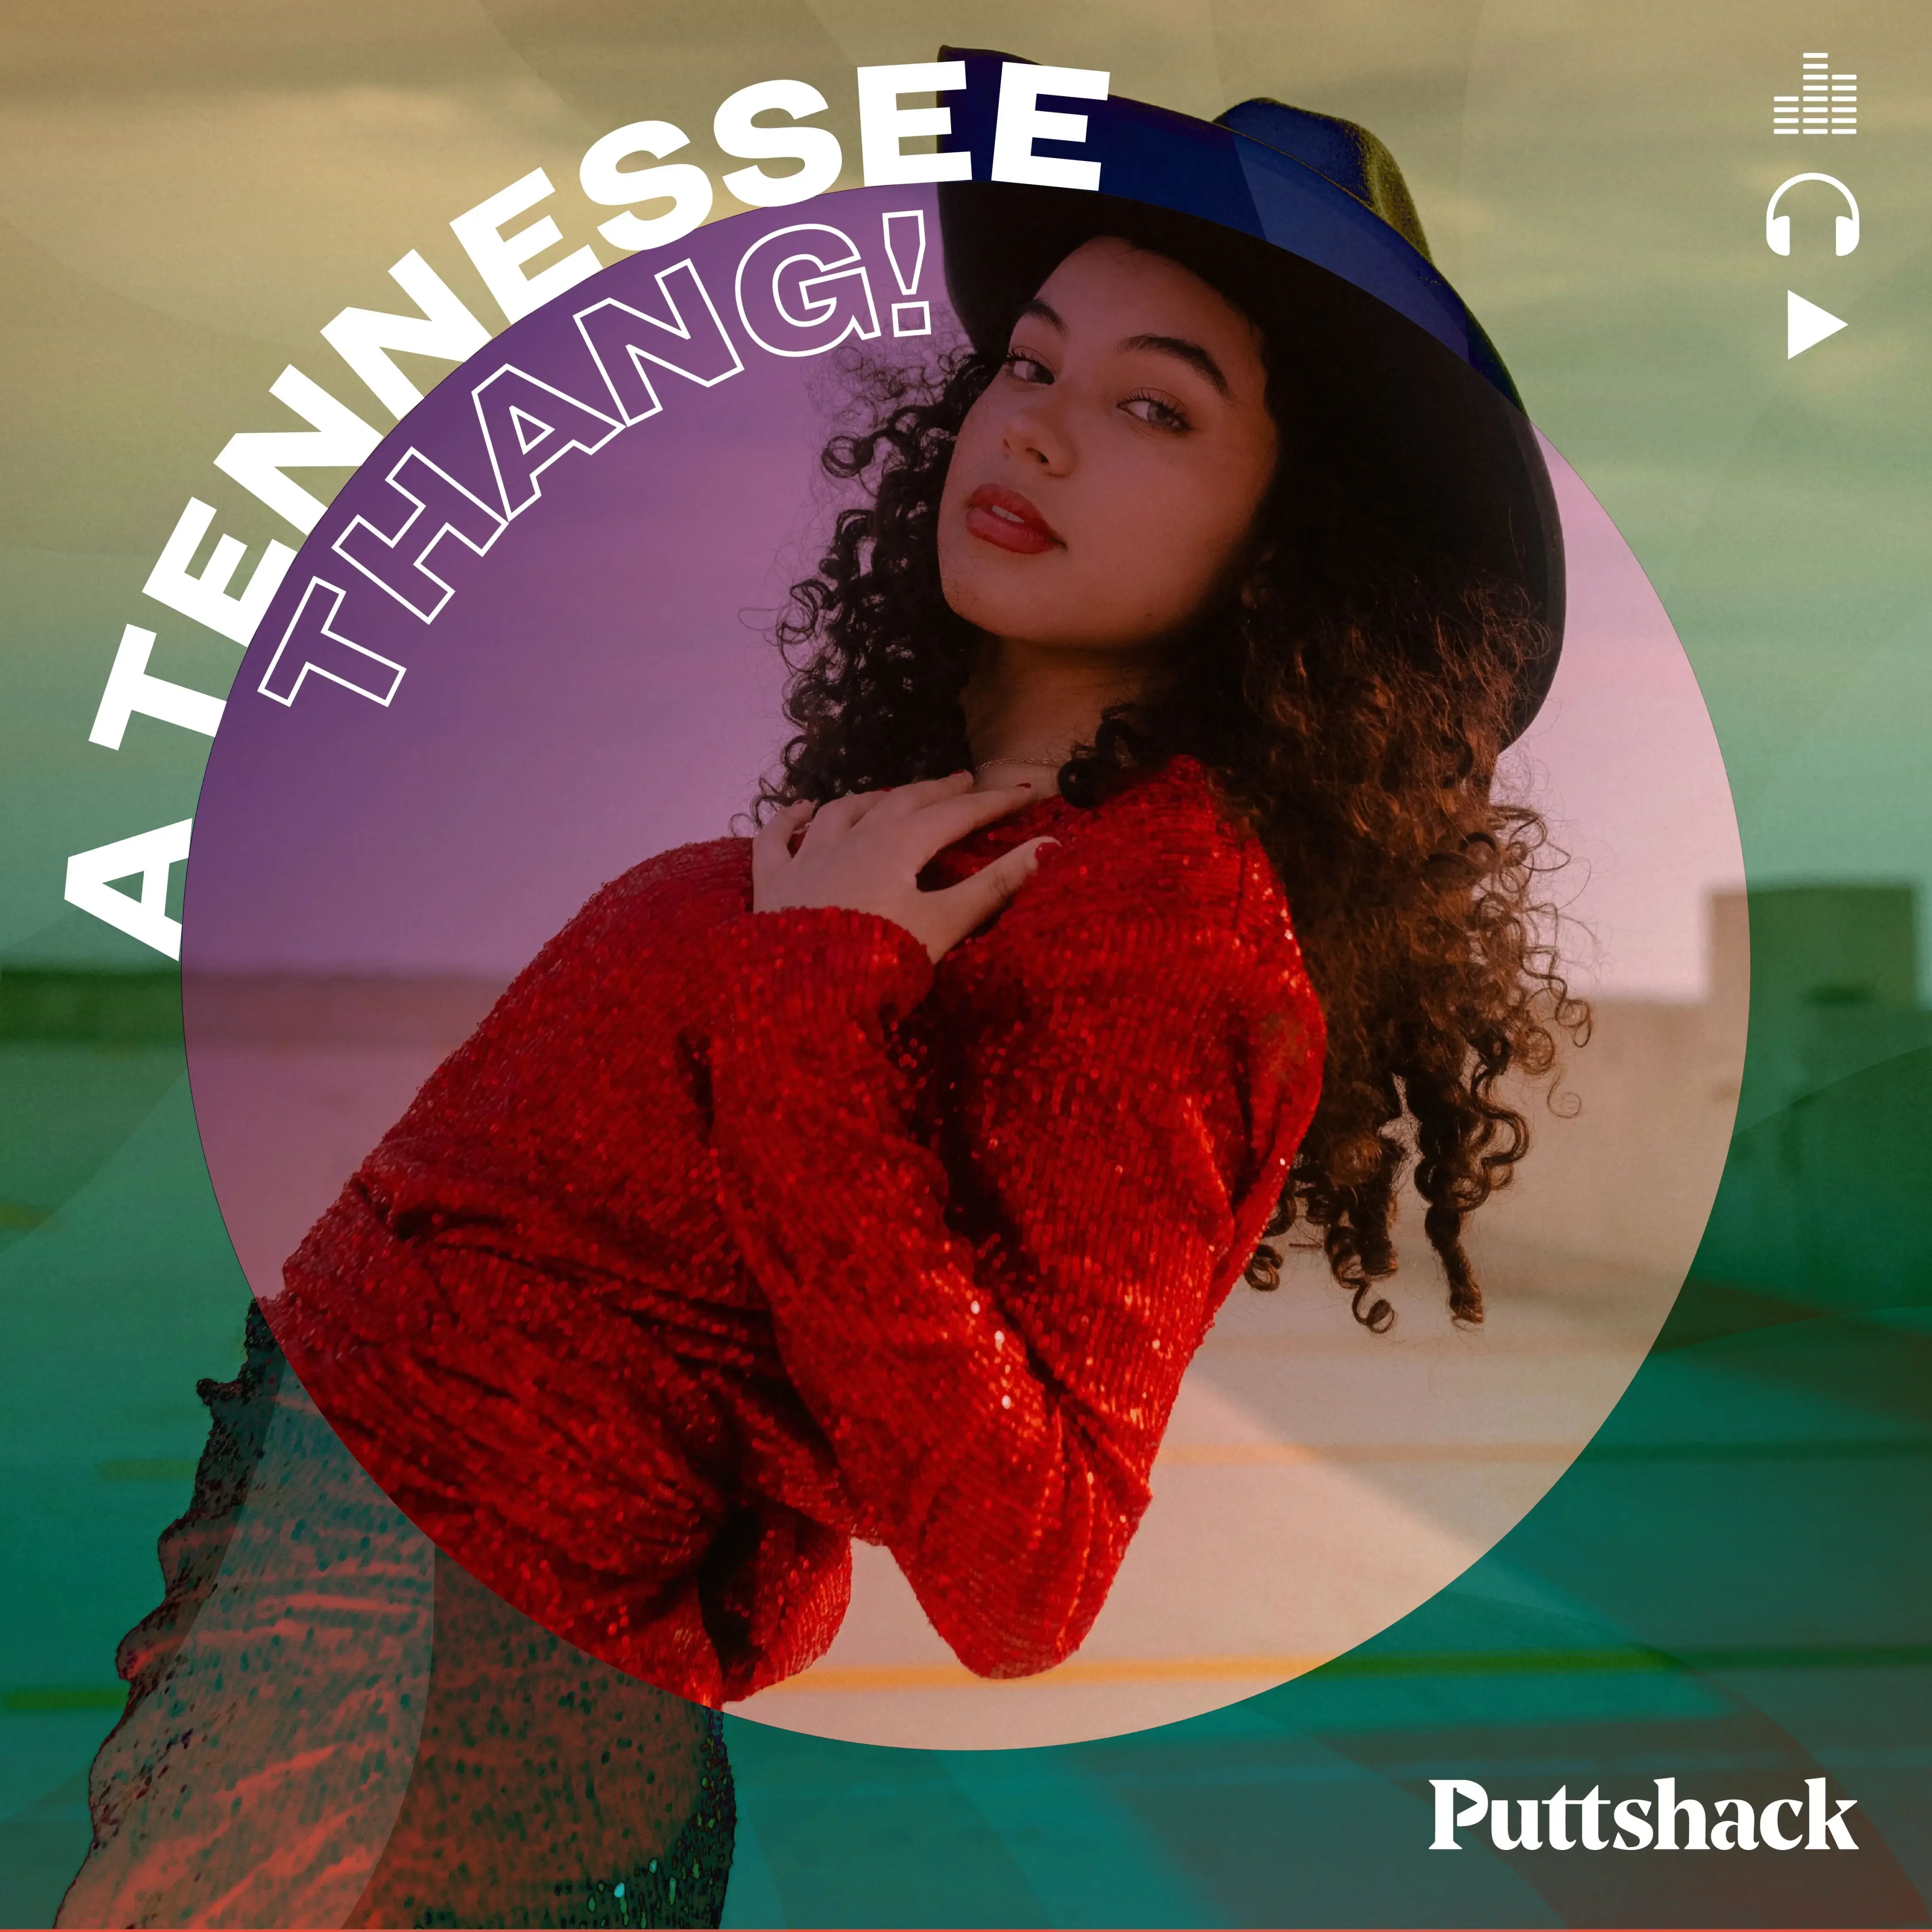 cover art for puttshack jams of a girl, in a cowboy hat, leaning back